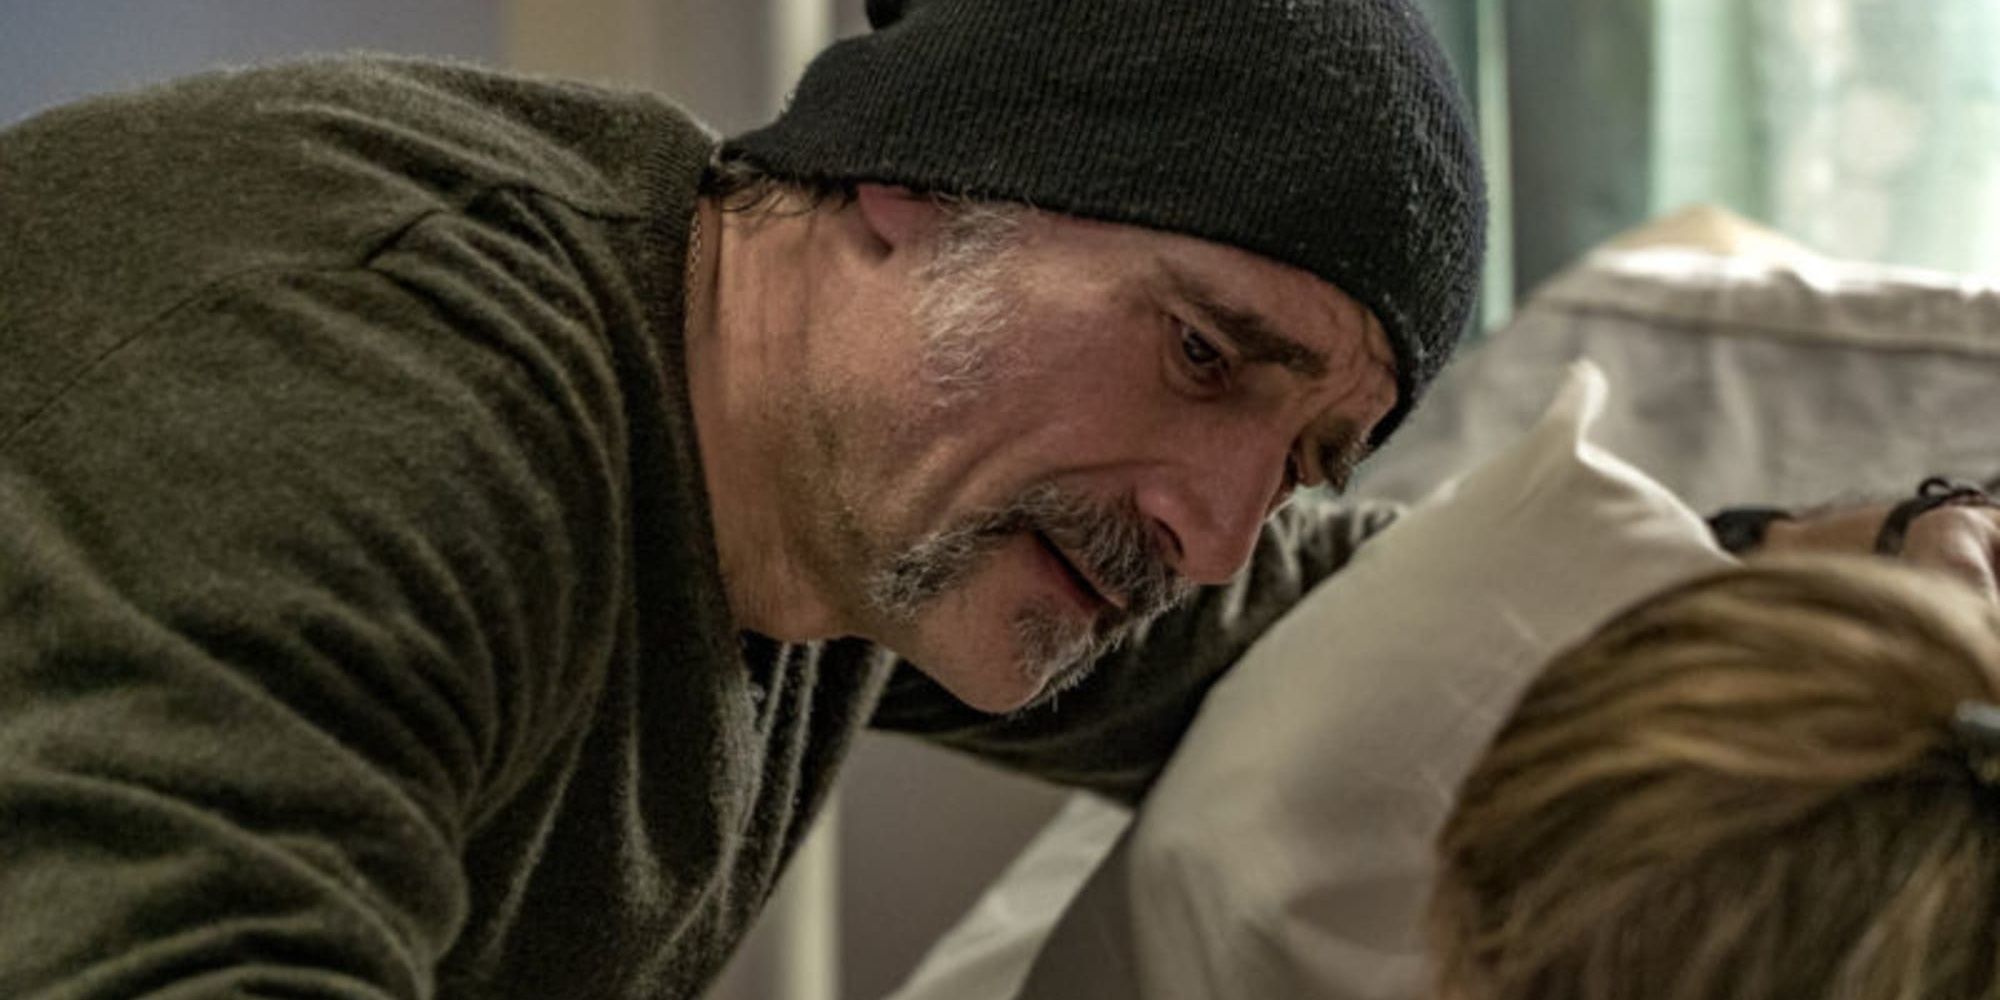 Olinsky visits his daughter in hospital after she was caught up in a warehouse fire in Chicago PD